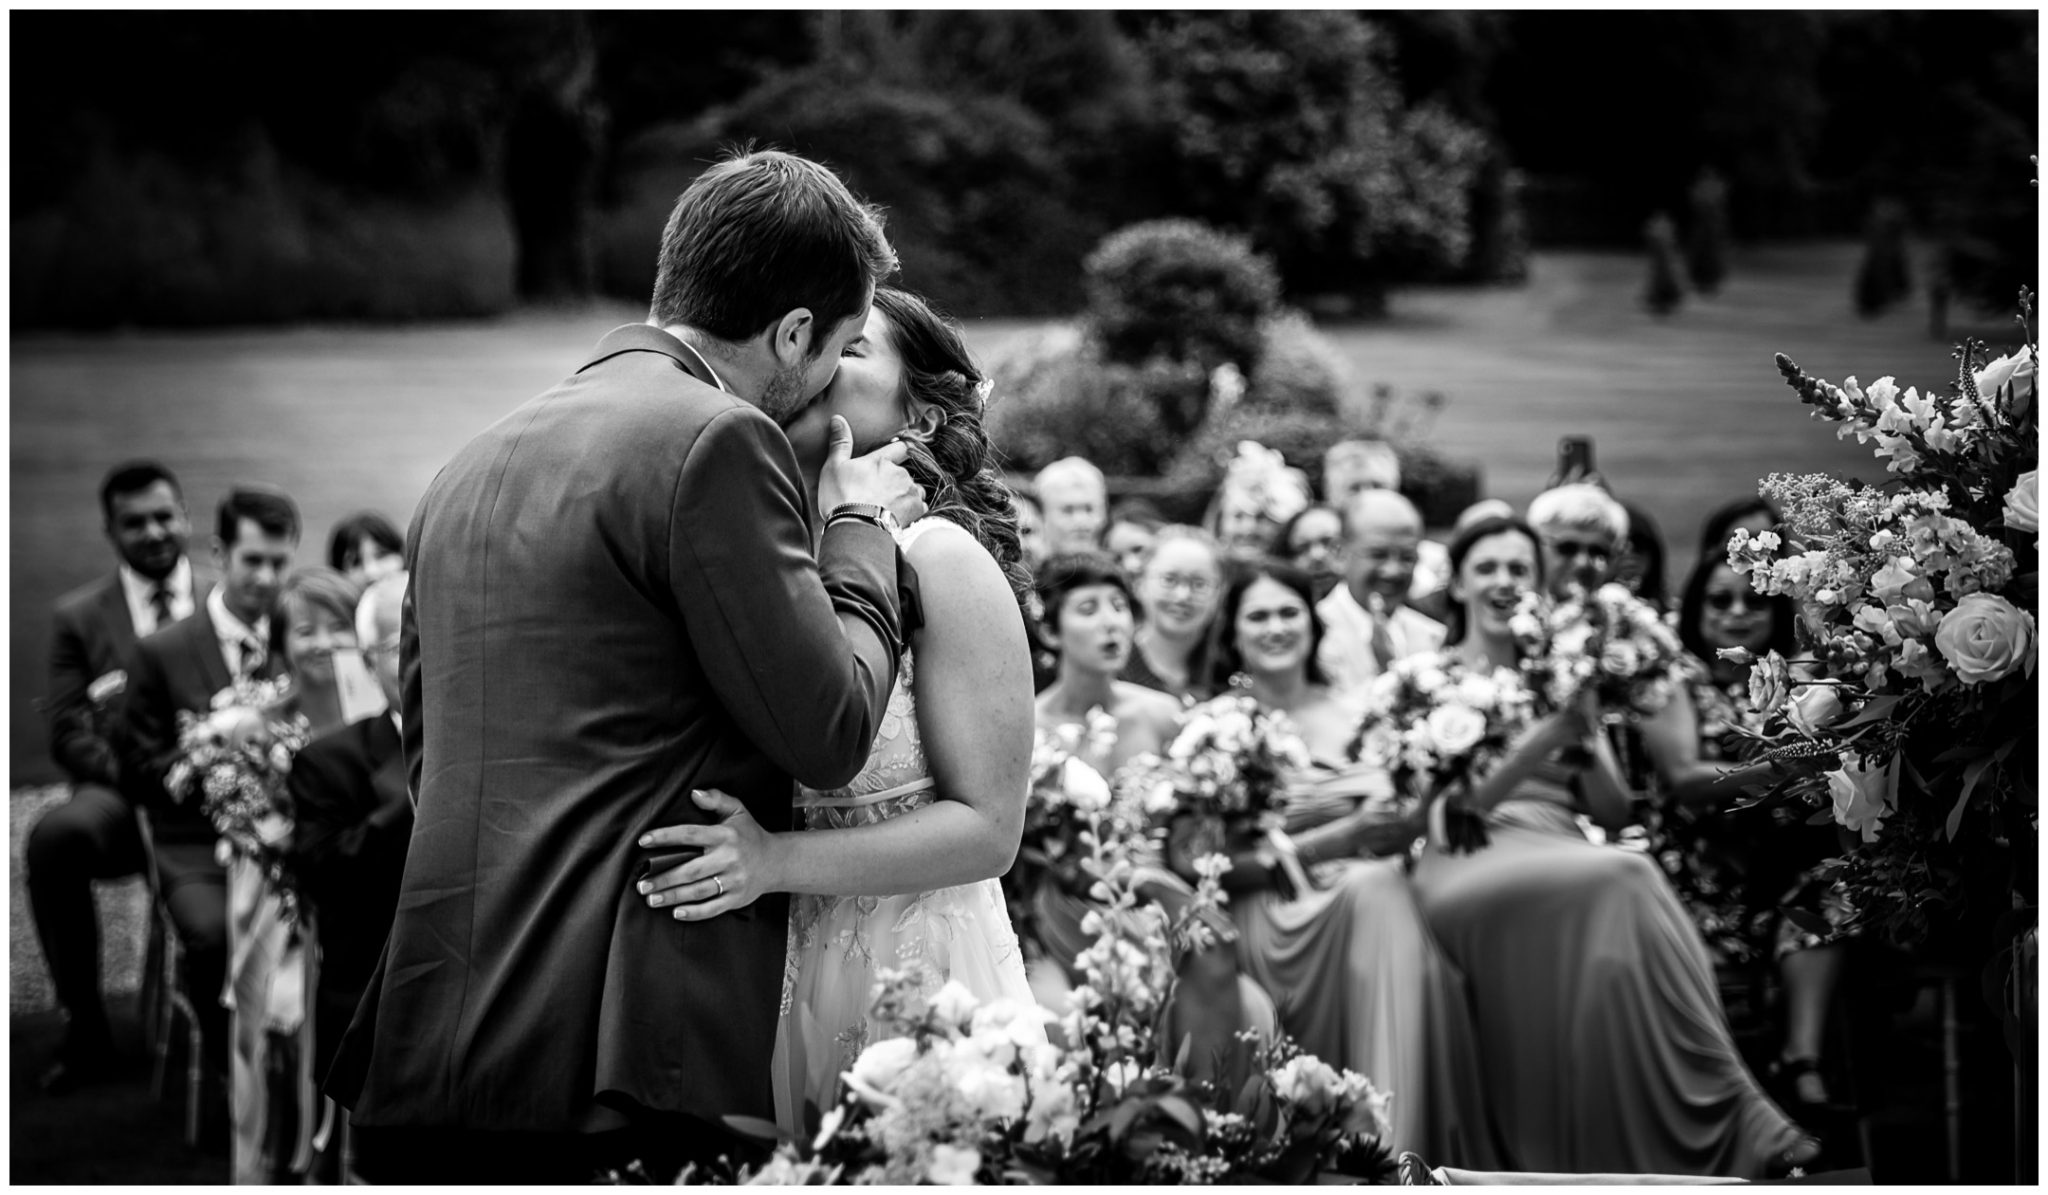 The groom kisses the bride during the ceremony, black and white documentary wedding photo